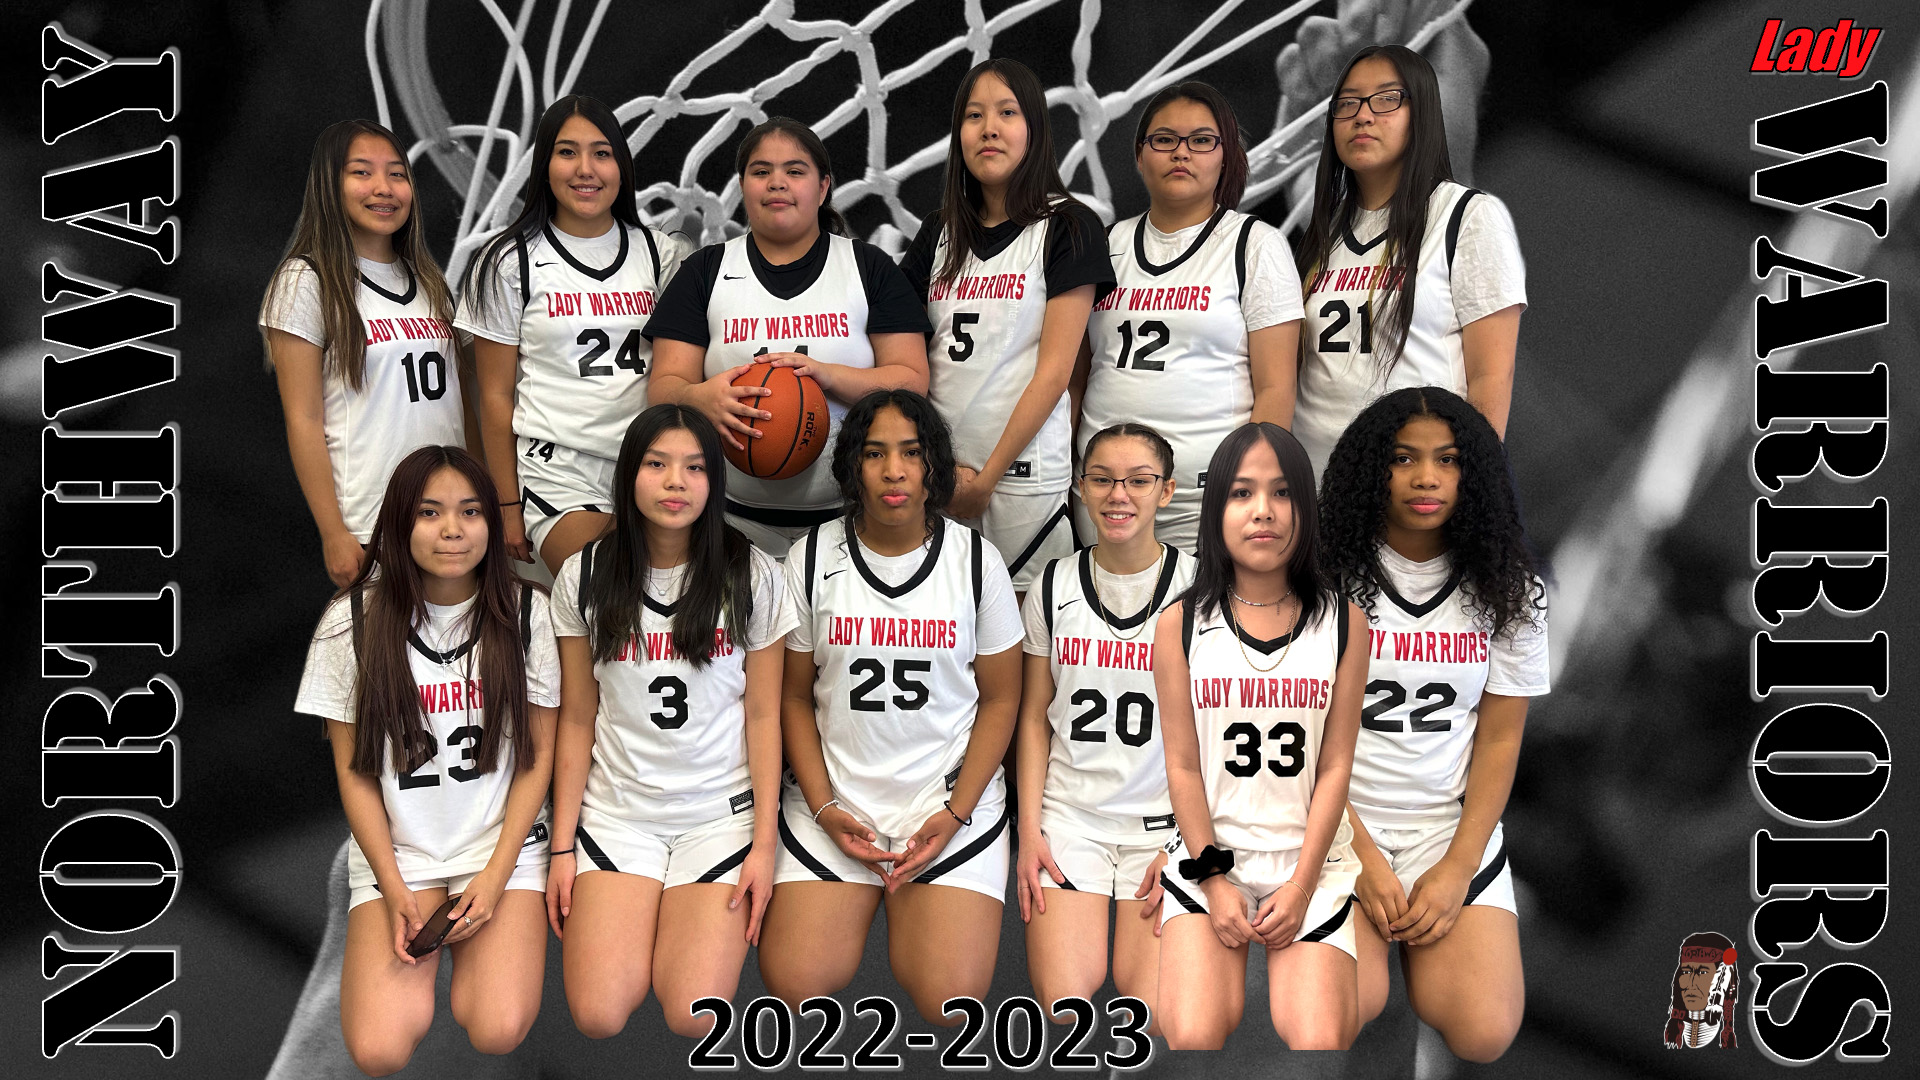 Tectonic Metals is a proud sponsor of the Lady Warriors basketball team from the Walter Northway School in Alaska.